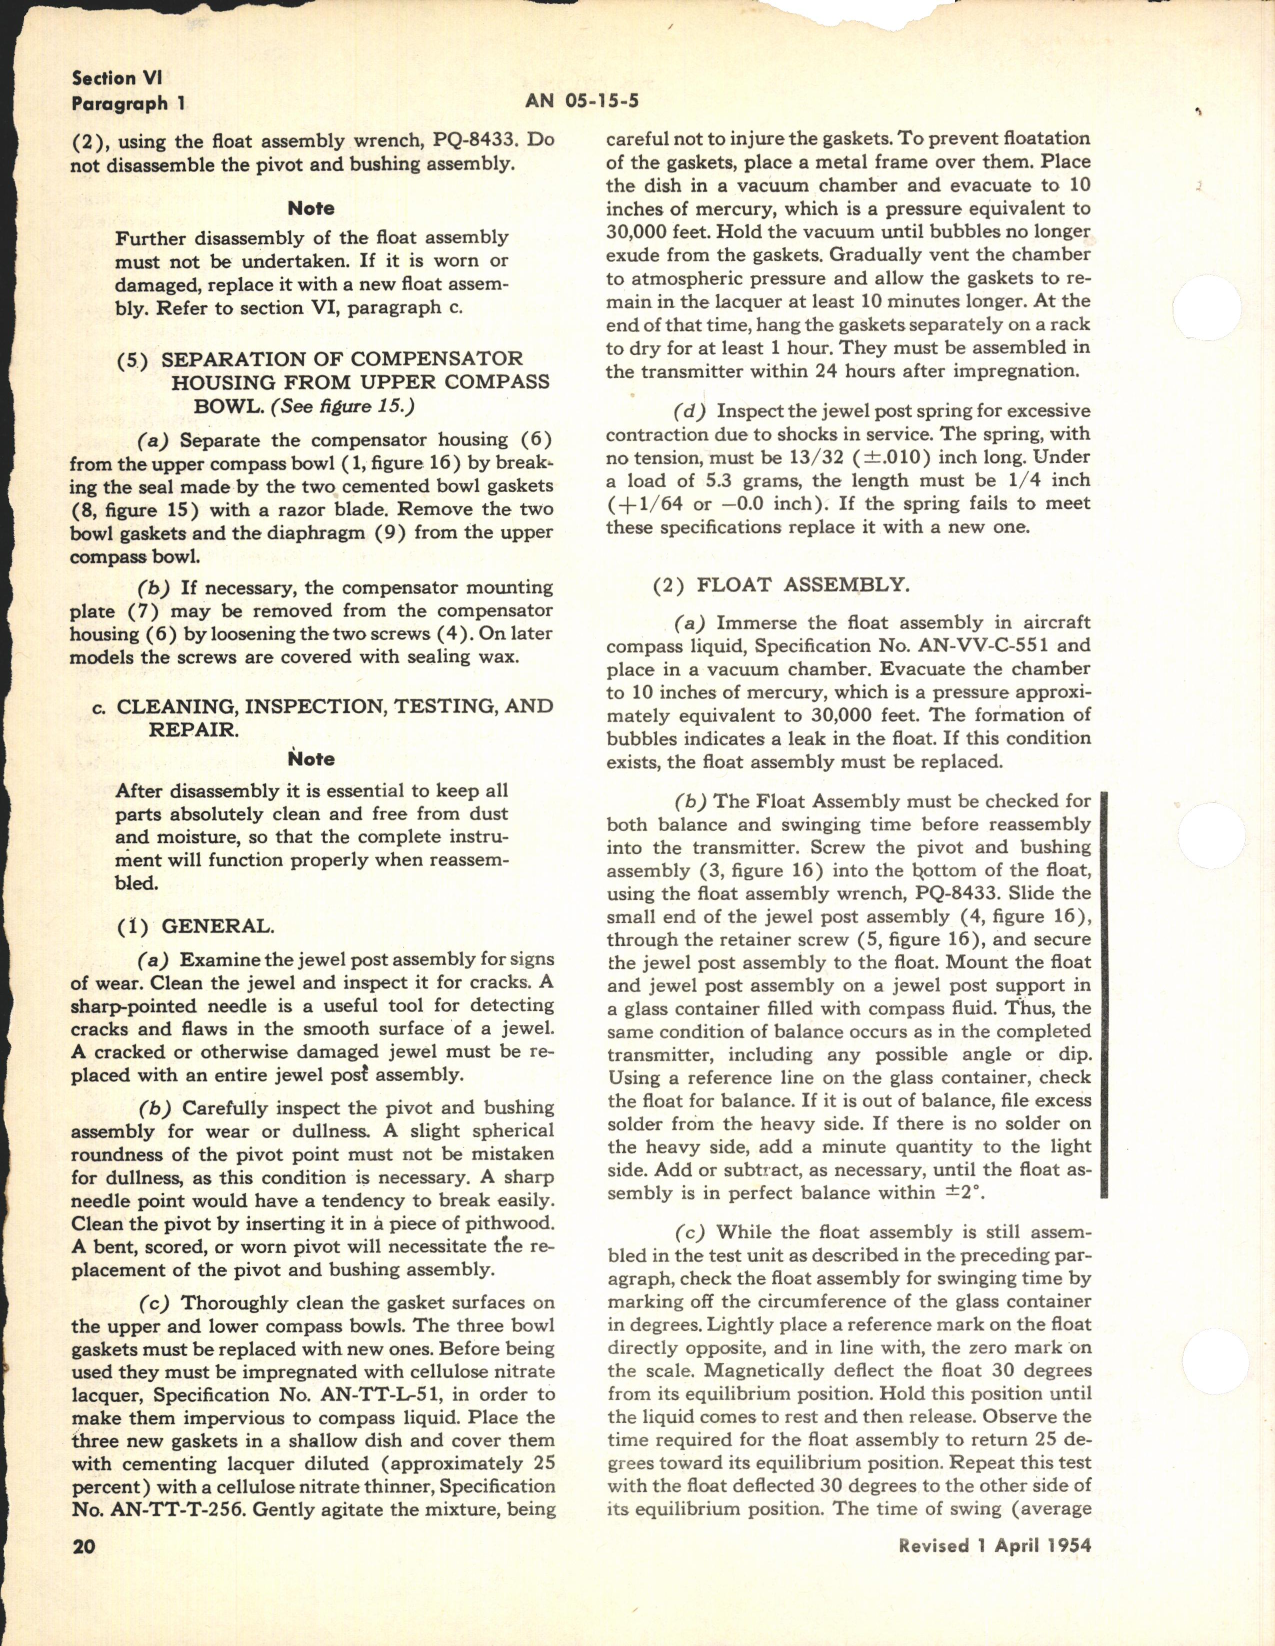 Sample page 4 from AirCorps Library document: Operation, Service, & Overhaul Inst w/ Parts Catalog for Magnesyn Remote Compass Indicators and Transmitters